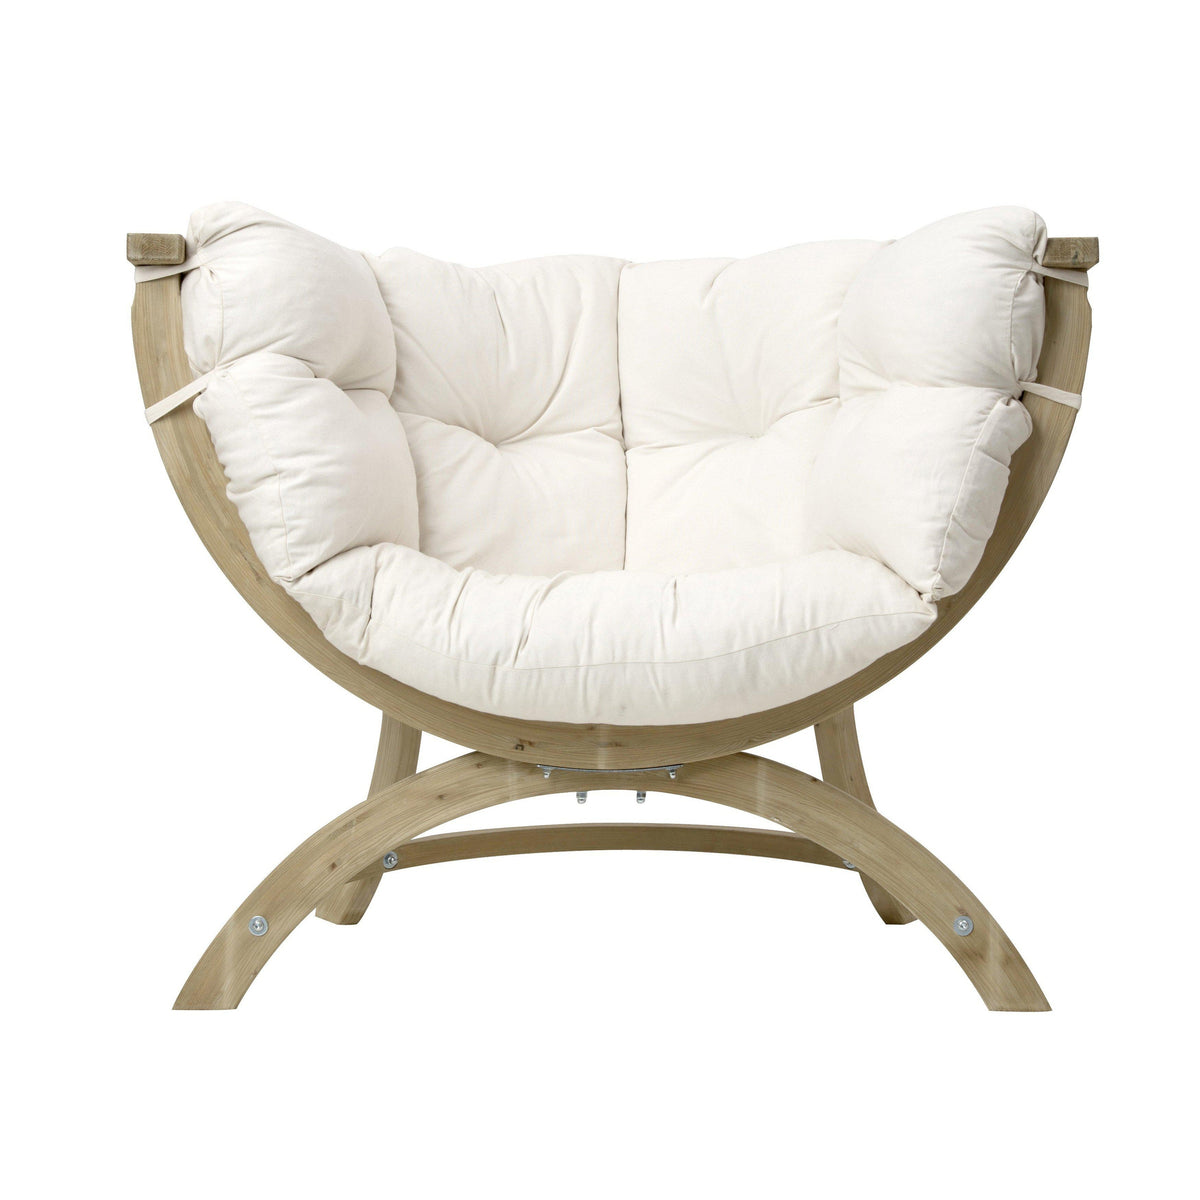 Siena UNO Chair, Natural, from Byer of Maine